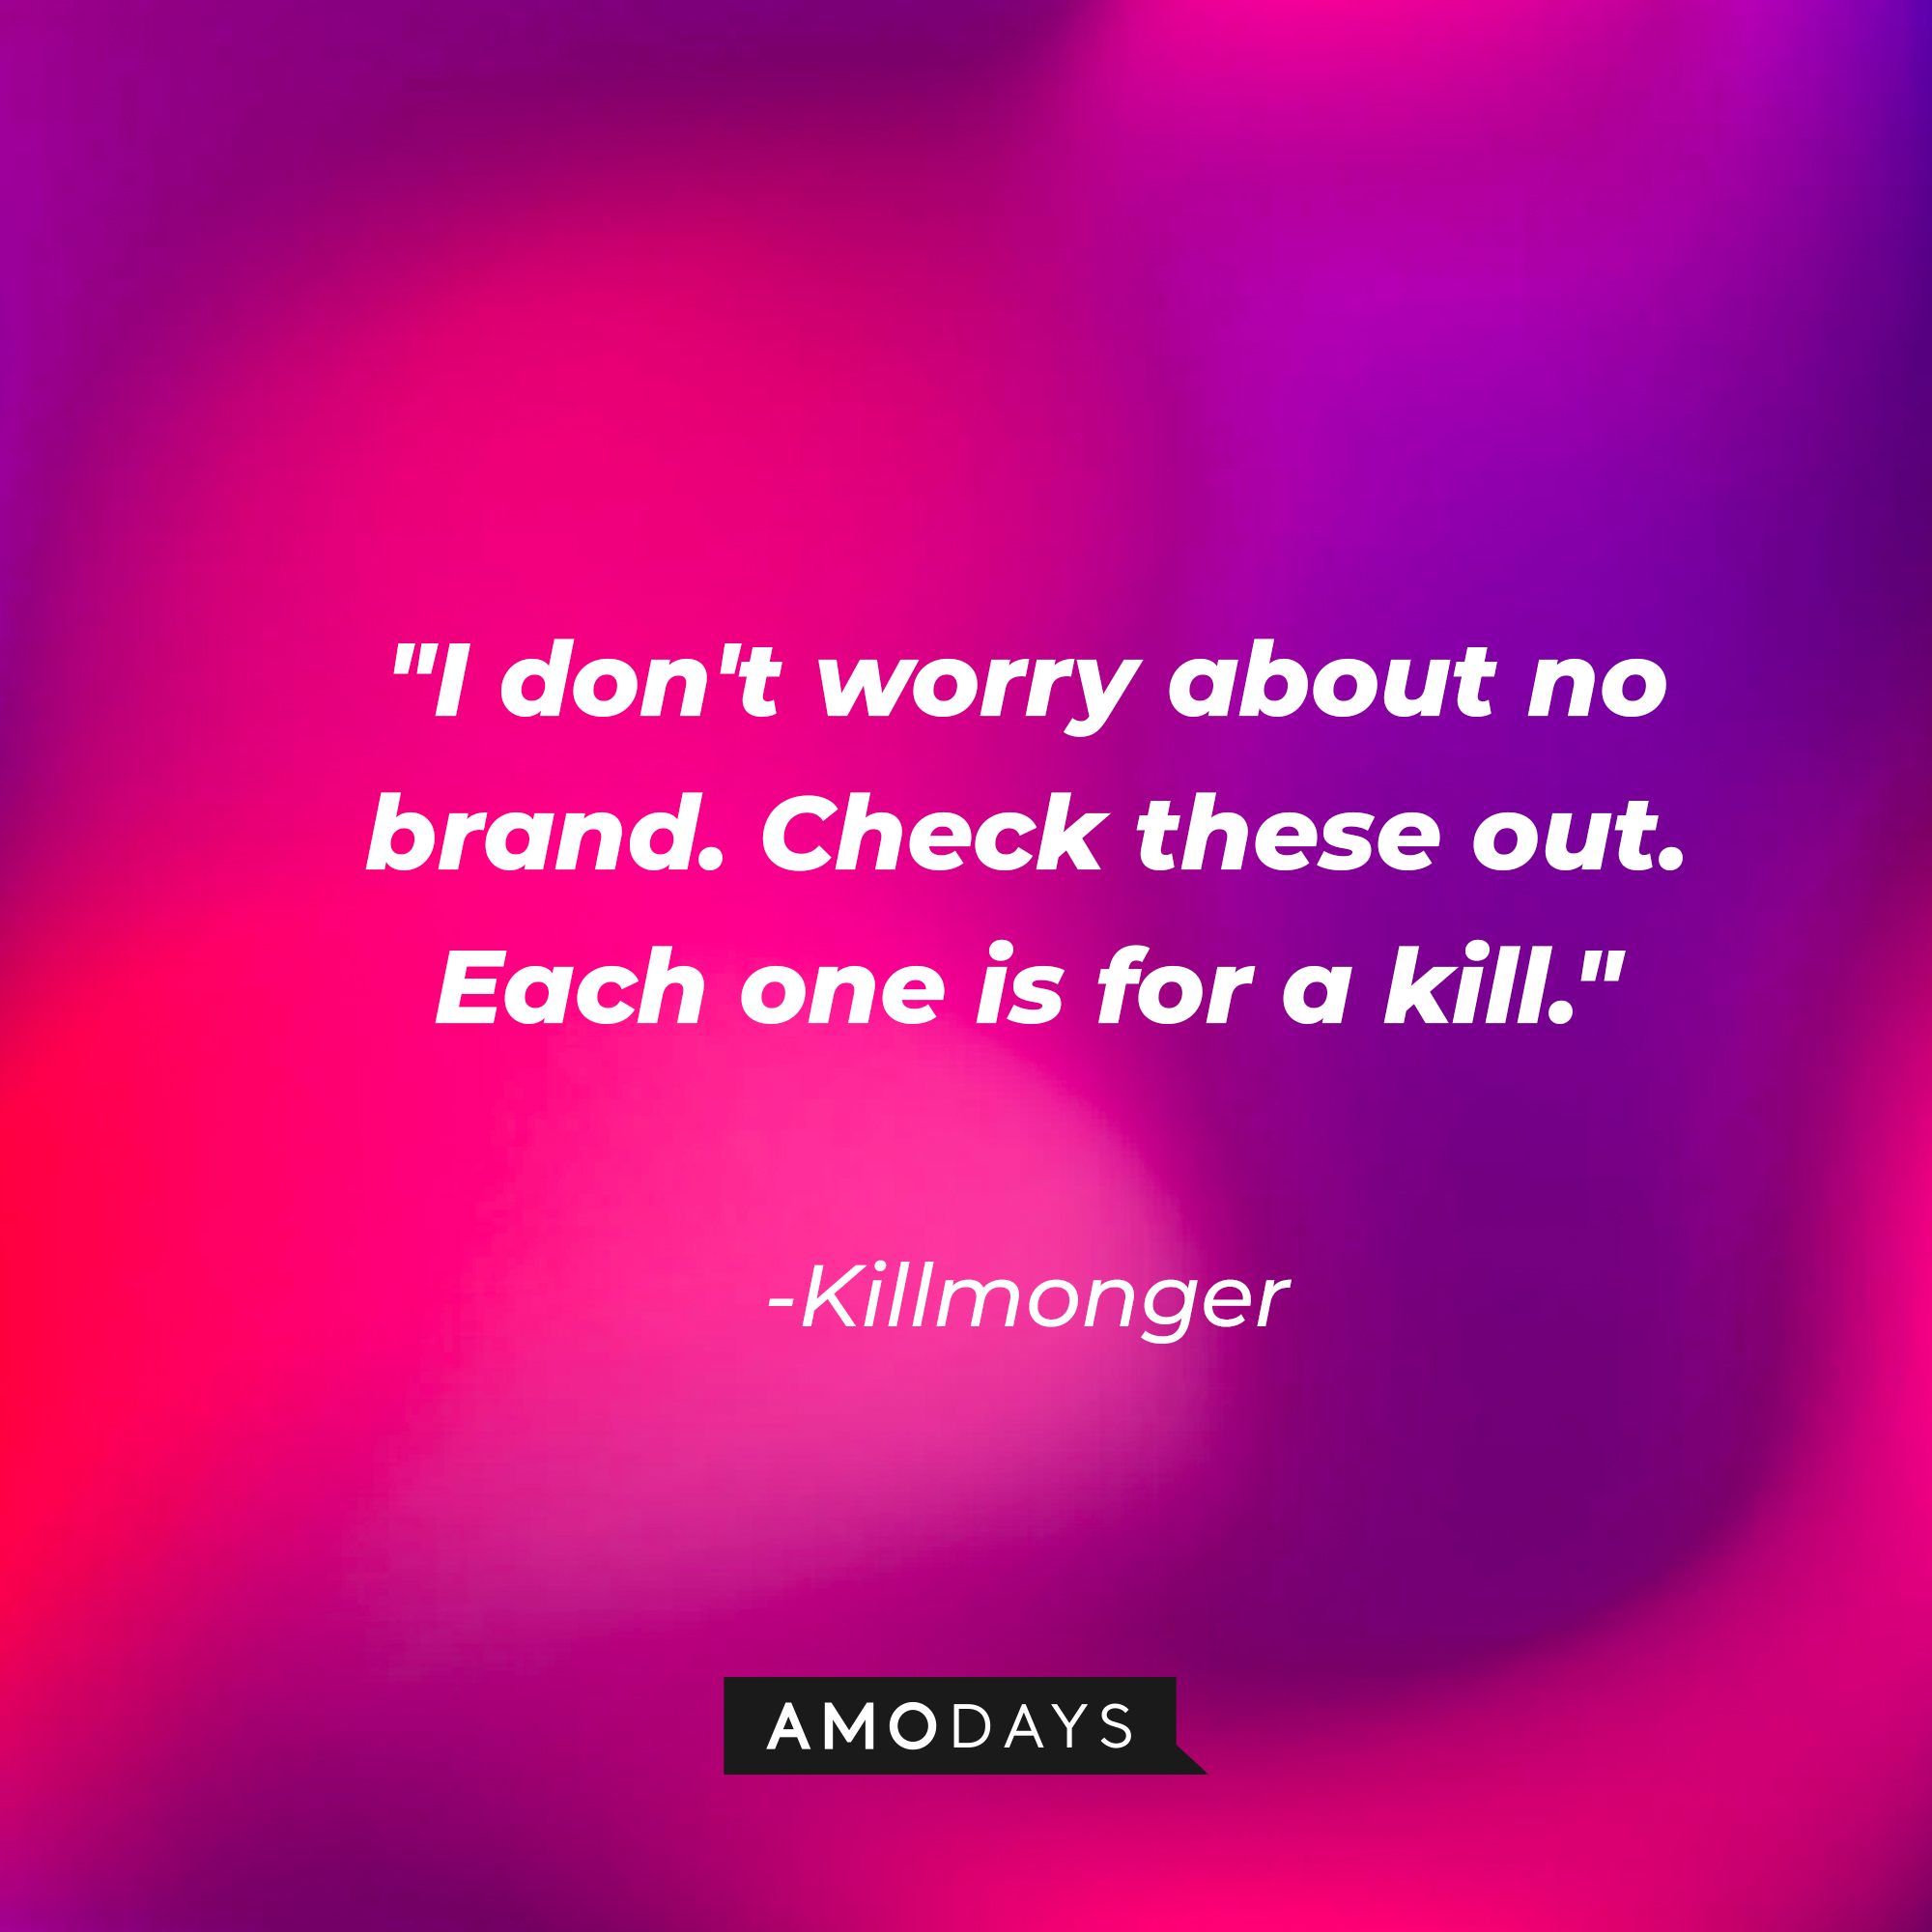 Killmonger's quote: "I don't worry about no brand. Check these out. Each one is for a kill." | Source: AmoDays